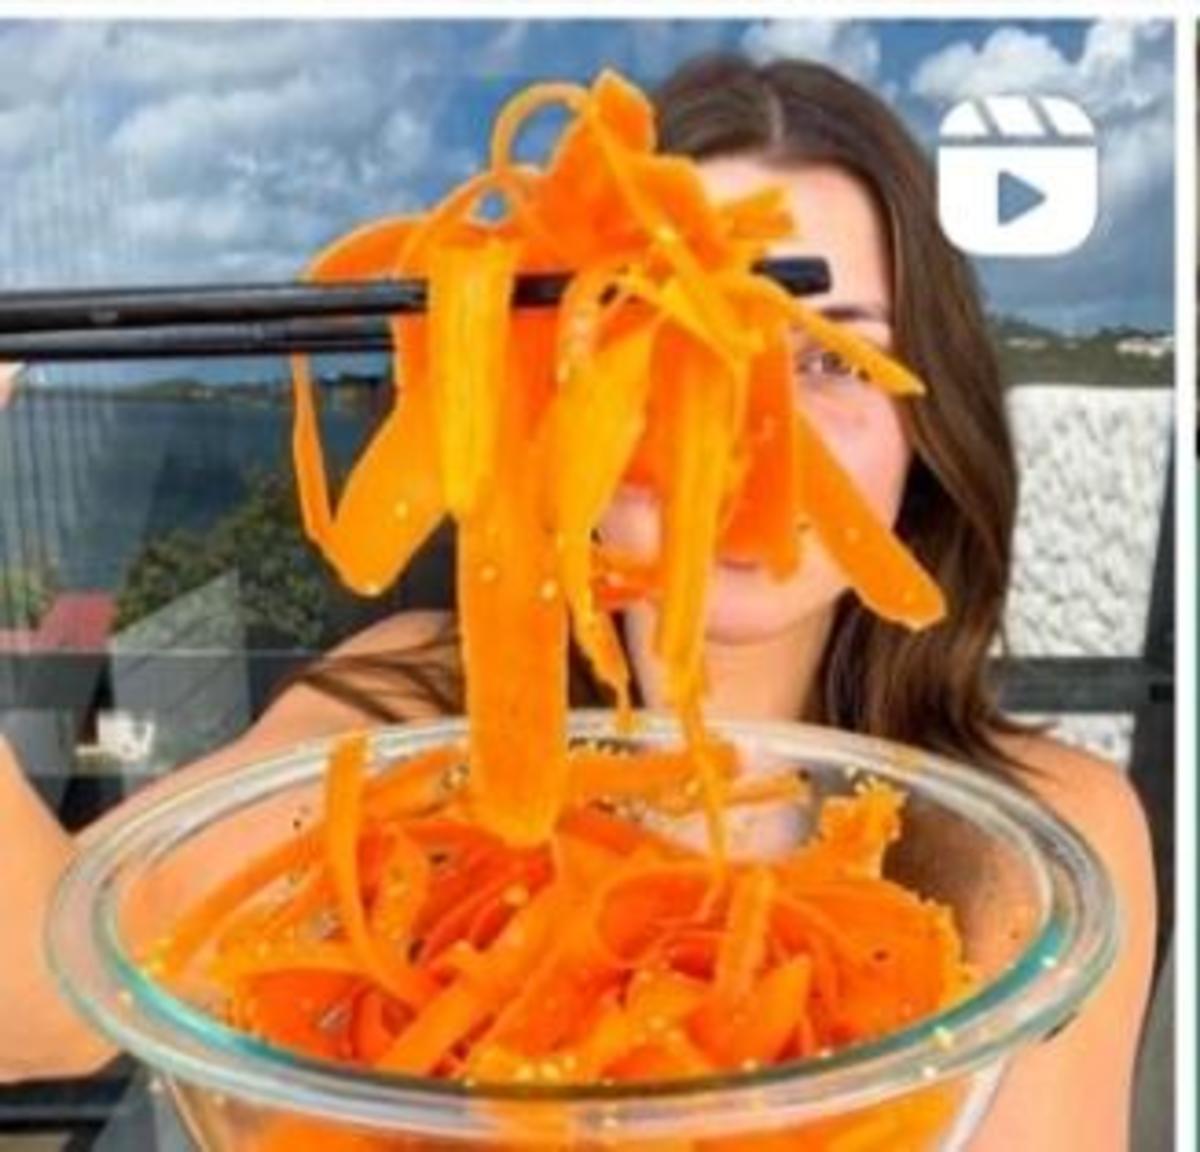 As a bonus for carrot lovers, check out these three quick and easy delicious carrot salad recipes: TikTok Ribbon Salad with Asian Flair, Spicy Carrot Salad, and Simple French Salad. 